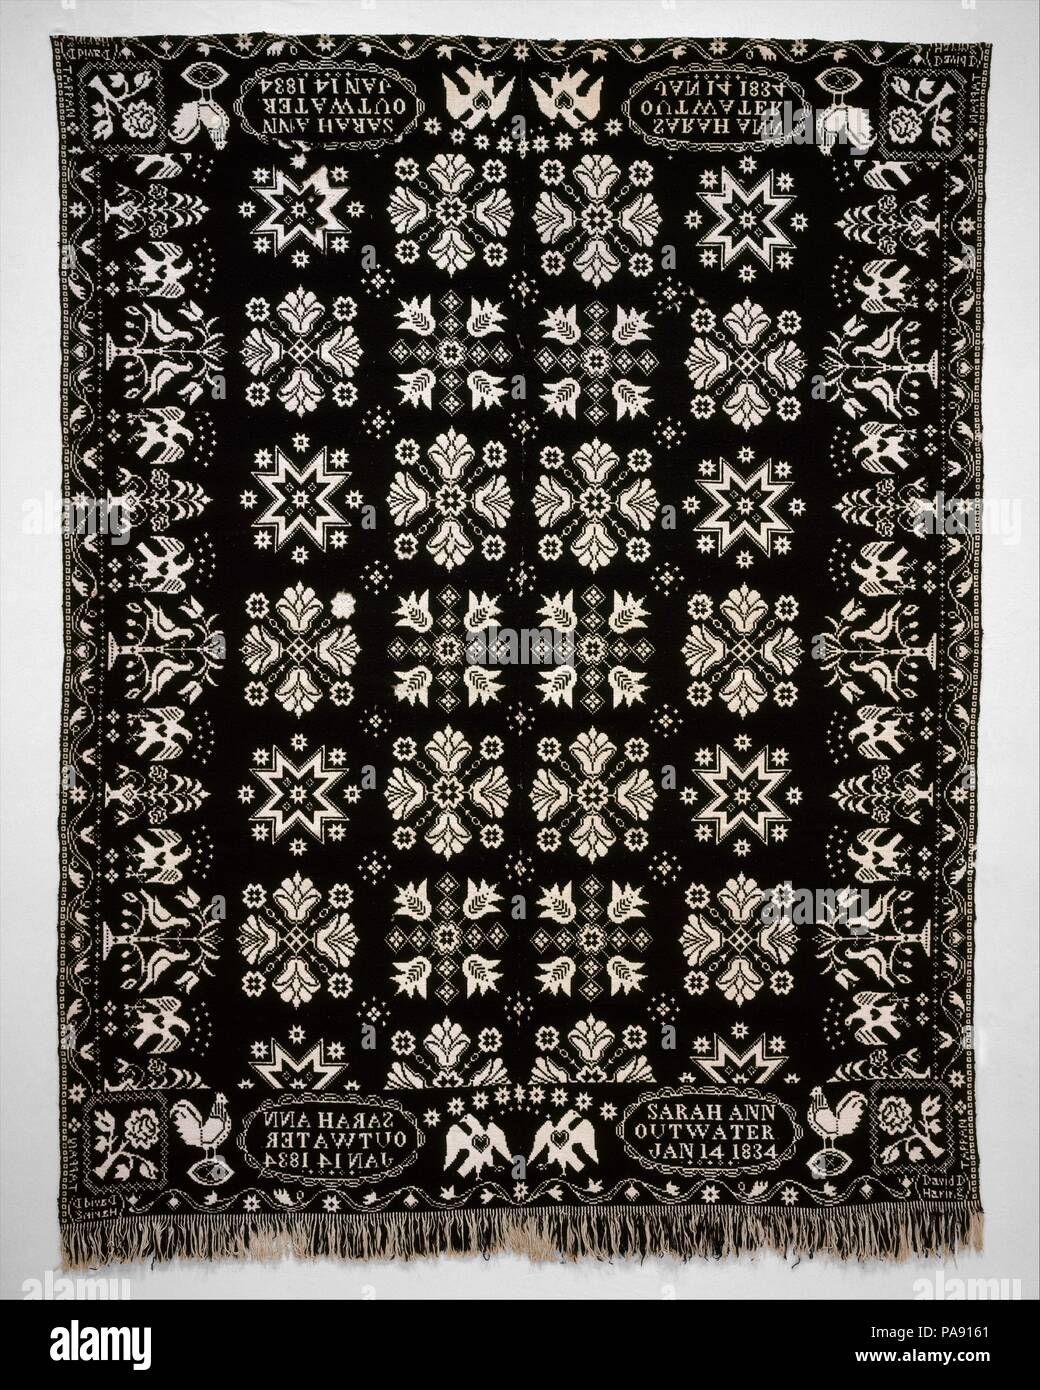 Coverlet. Culture: American. Dimensions: 98 3/8 x 75 in. (249.9 x 190.5 cm). Maker: David Daniel Haring (1800-1889). Date: 1834.  This dark blue wool and undyed cotton double cloth coverlet is woven in two panels and seamed at the center. Floral and star motifs typically found in Haring's work decorate the central field. The left and right borders have images of eagles with outspread wings alternating with vases of flowers and pairs of birds in trees. From left to right along each panel of the top and bottom borders, there is a rooster standing on an egg, the inscription cartouche, and an eagl Stock Photo